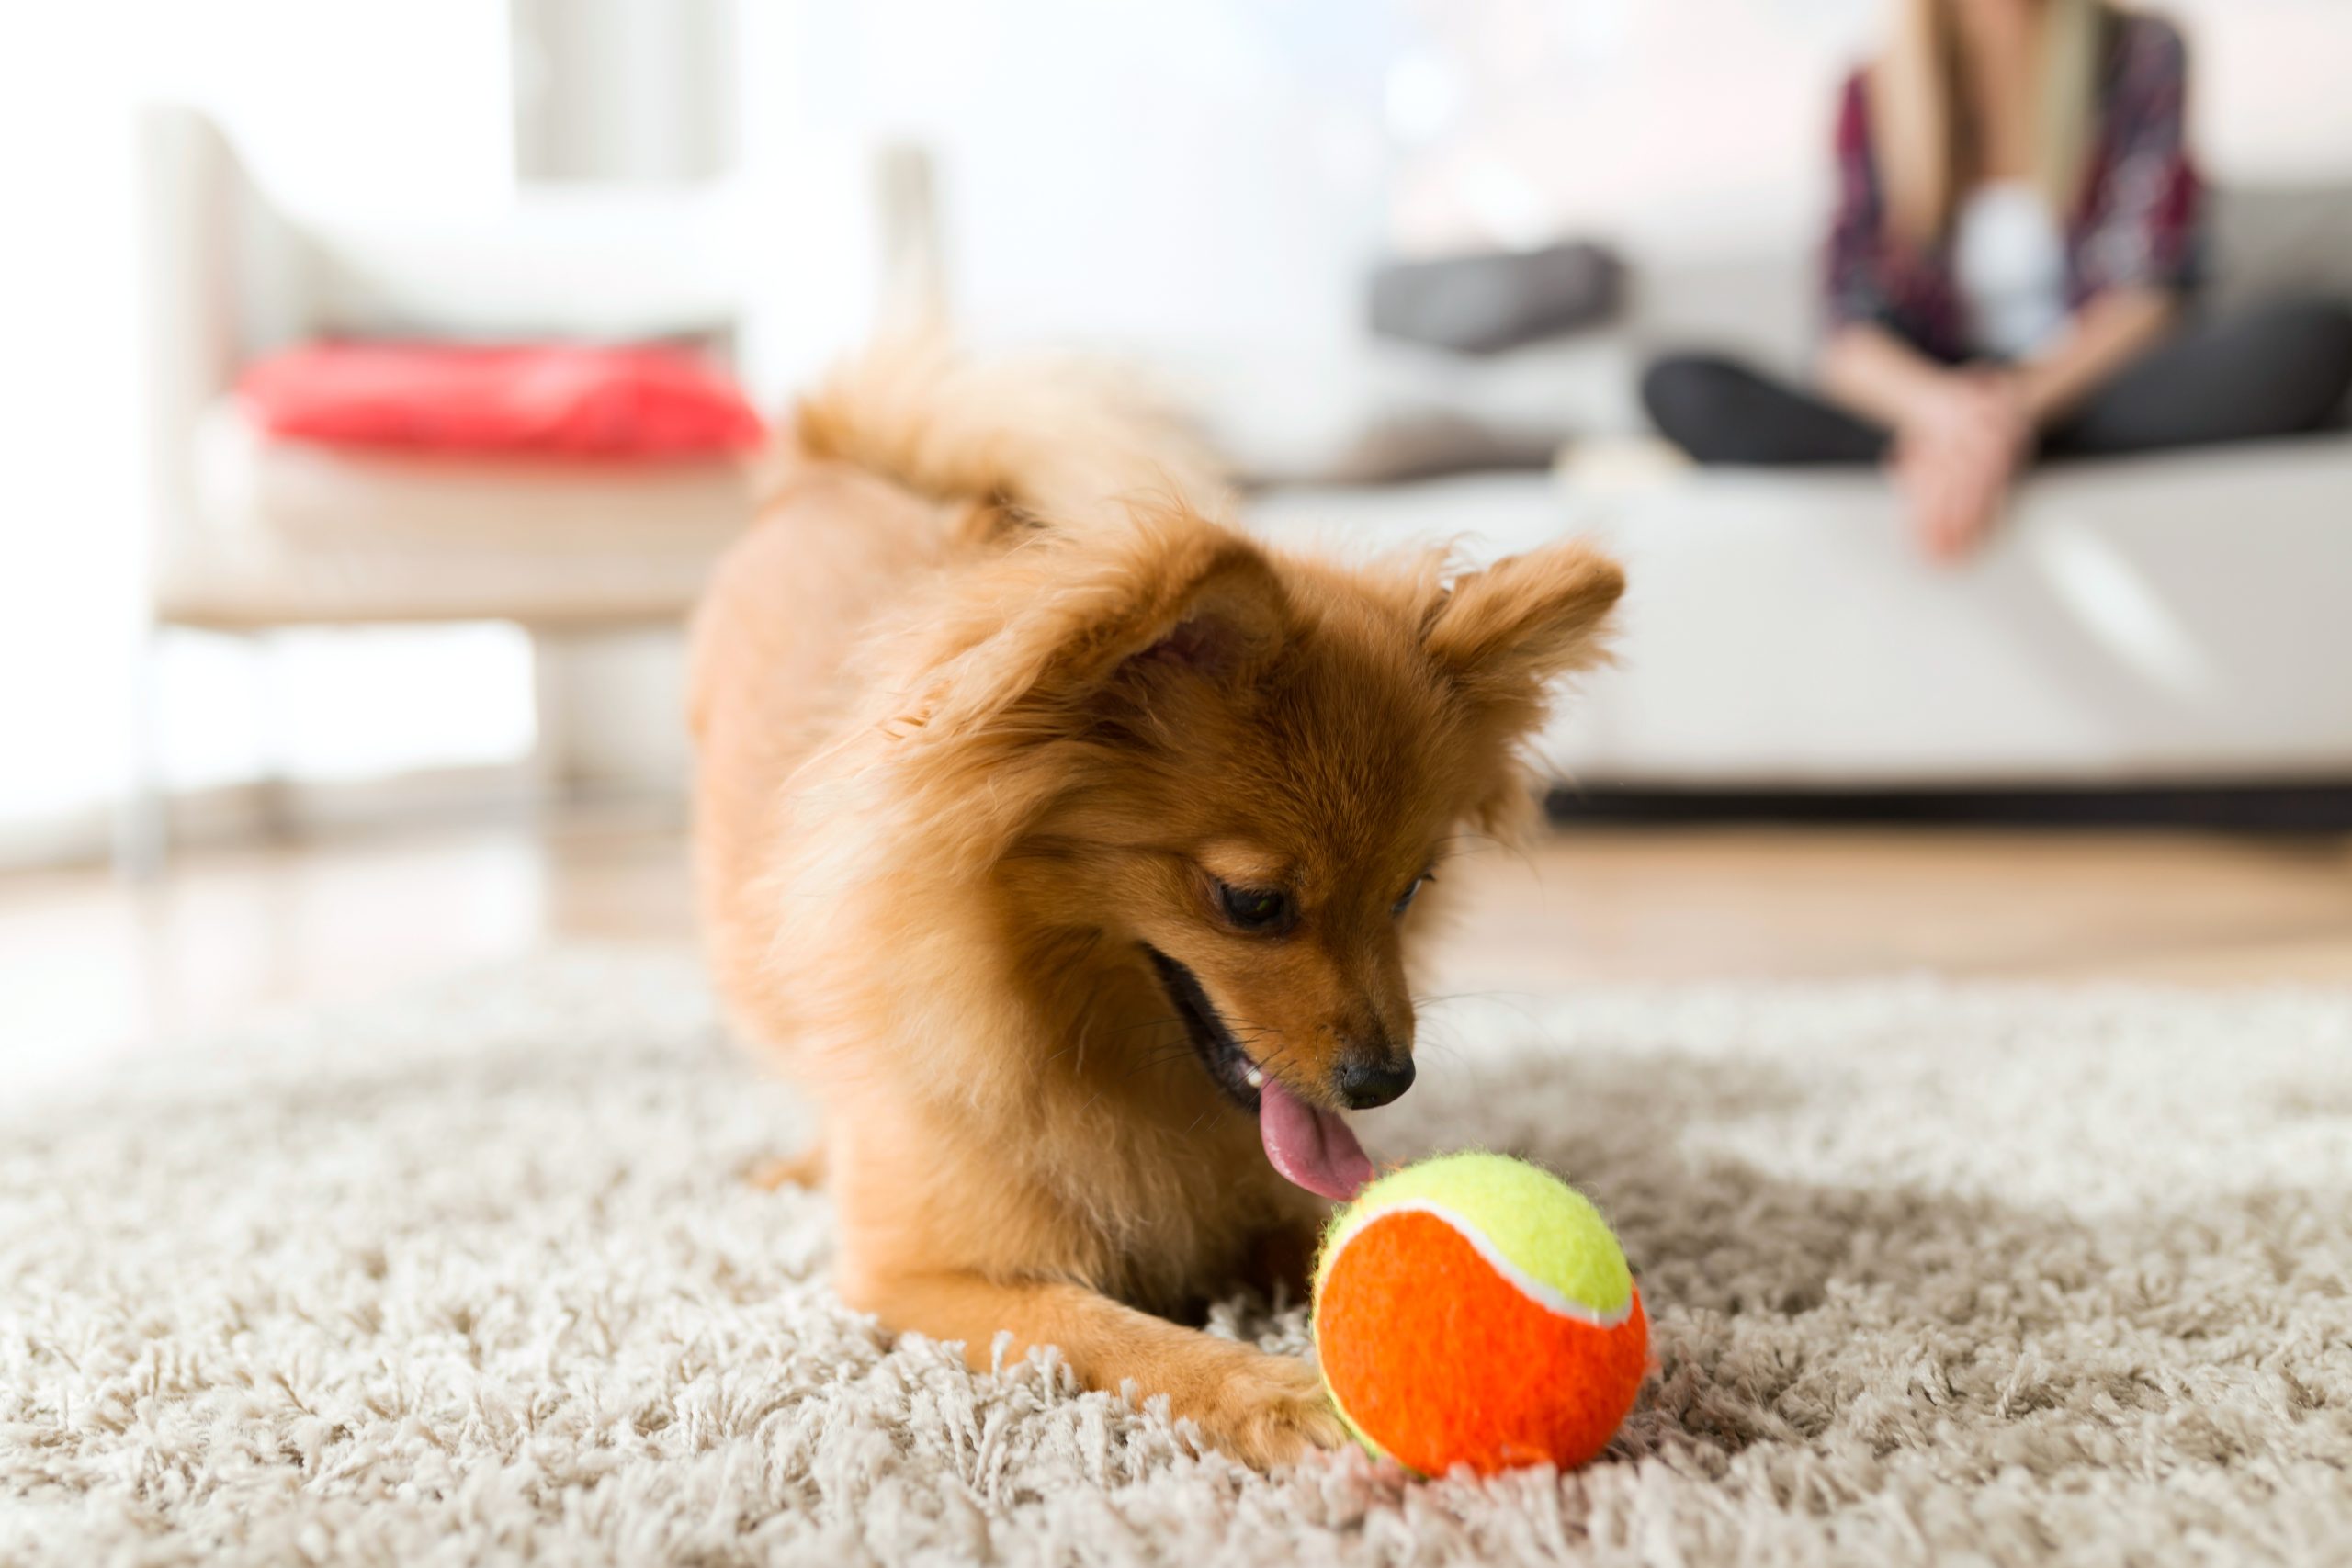 How to Calm an Active Dog: 5 Simple Tricks